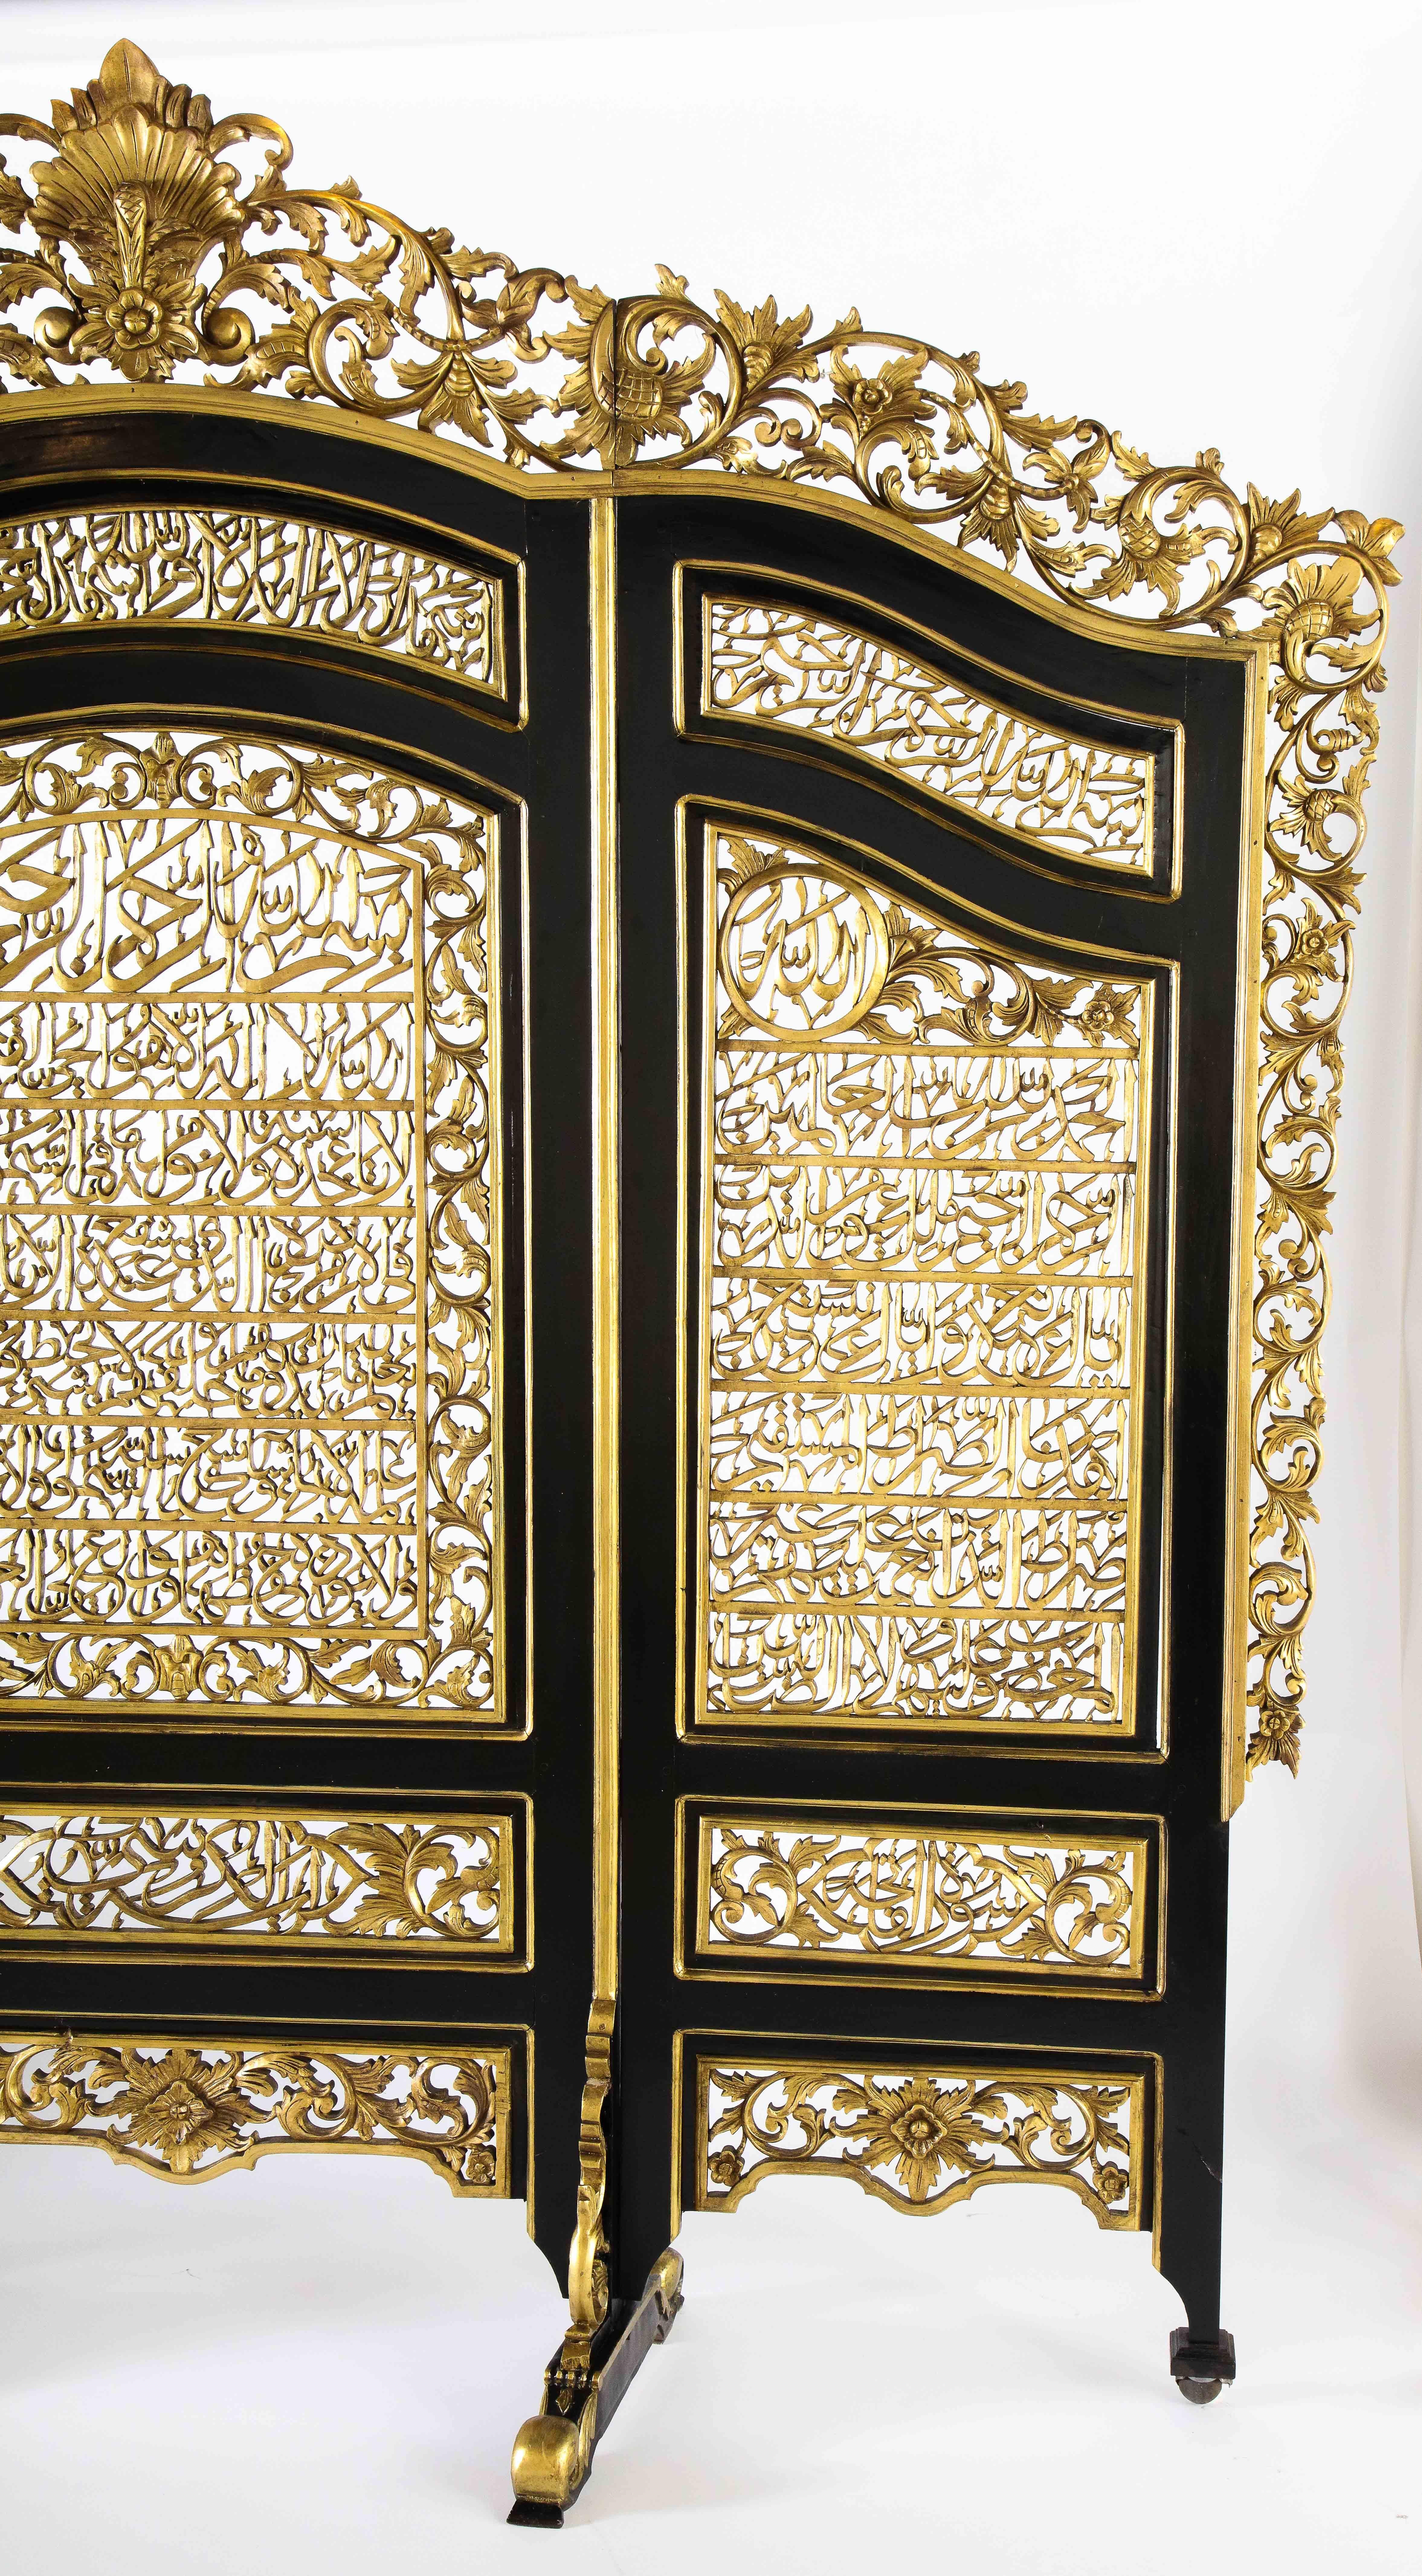 Rare and Exceptional Islamic Gilt and Ebonized Wood Three-Panel Screen 9